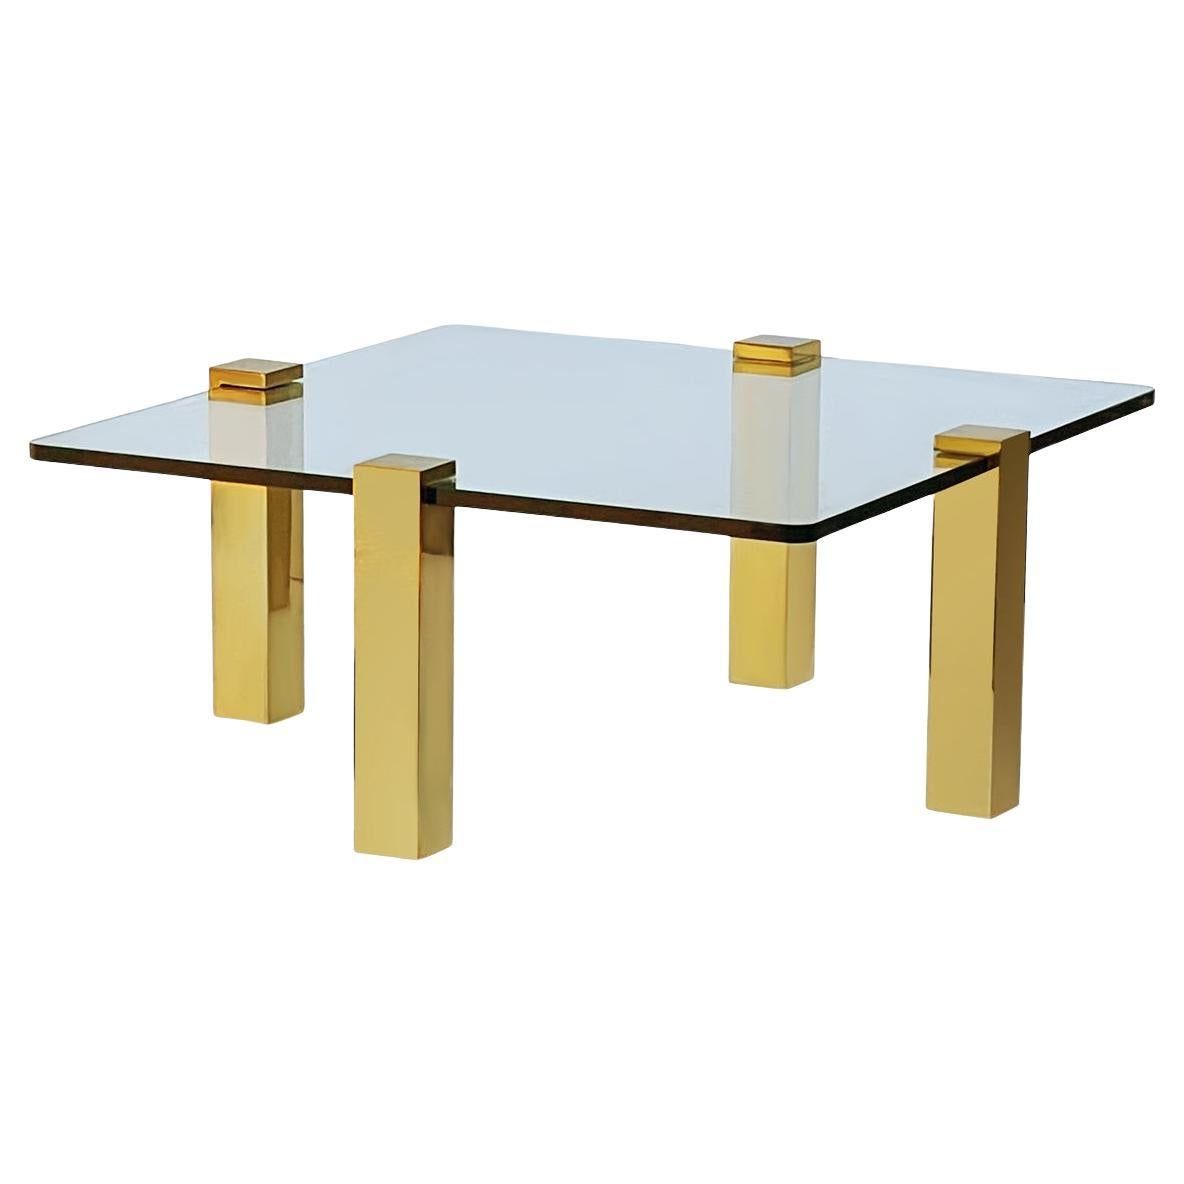 Mid Century Transitional Modern Square Cocktail Table In Brass And Within Hassch Modern Square Cocktail Tables (View 11 of 20)